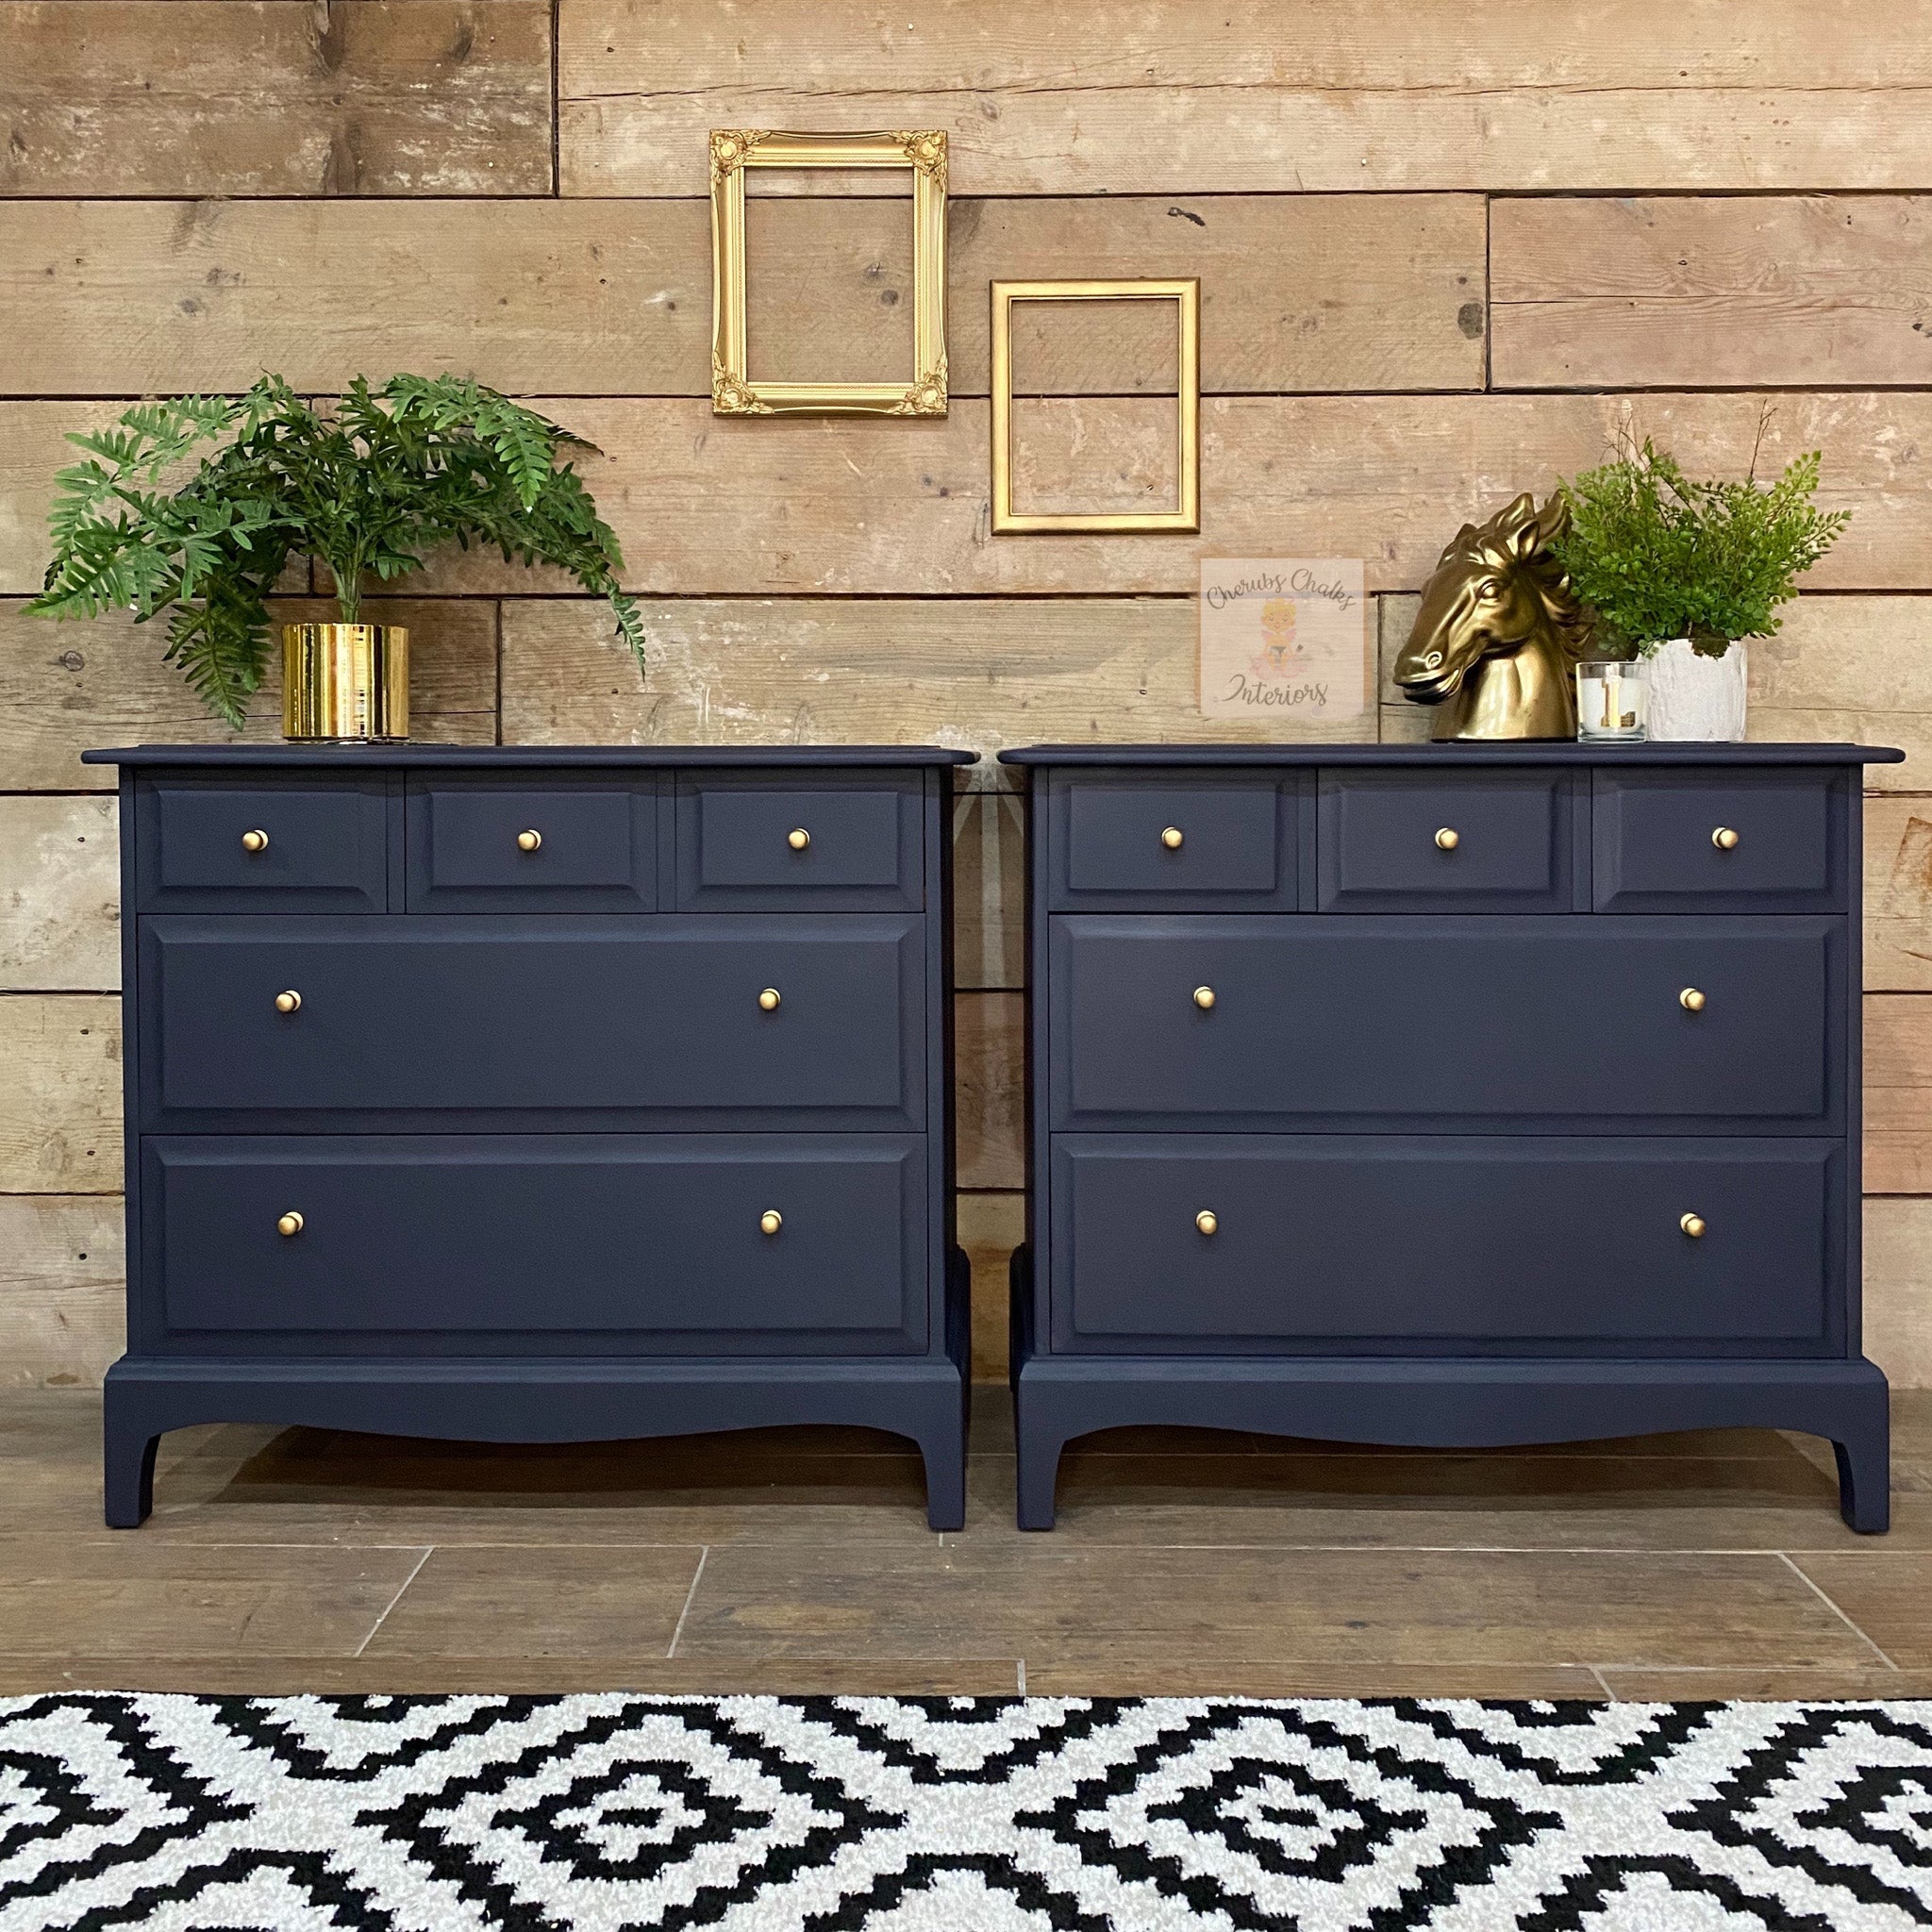 Two vintage 5-drawer small dressers refurbished by Cherubs Chalks Interiors are painted in Dixie Belle's In the Navy chalk mineral paint.